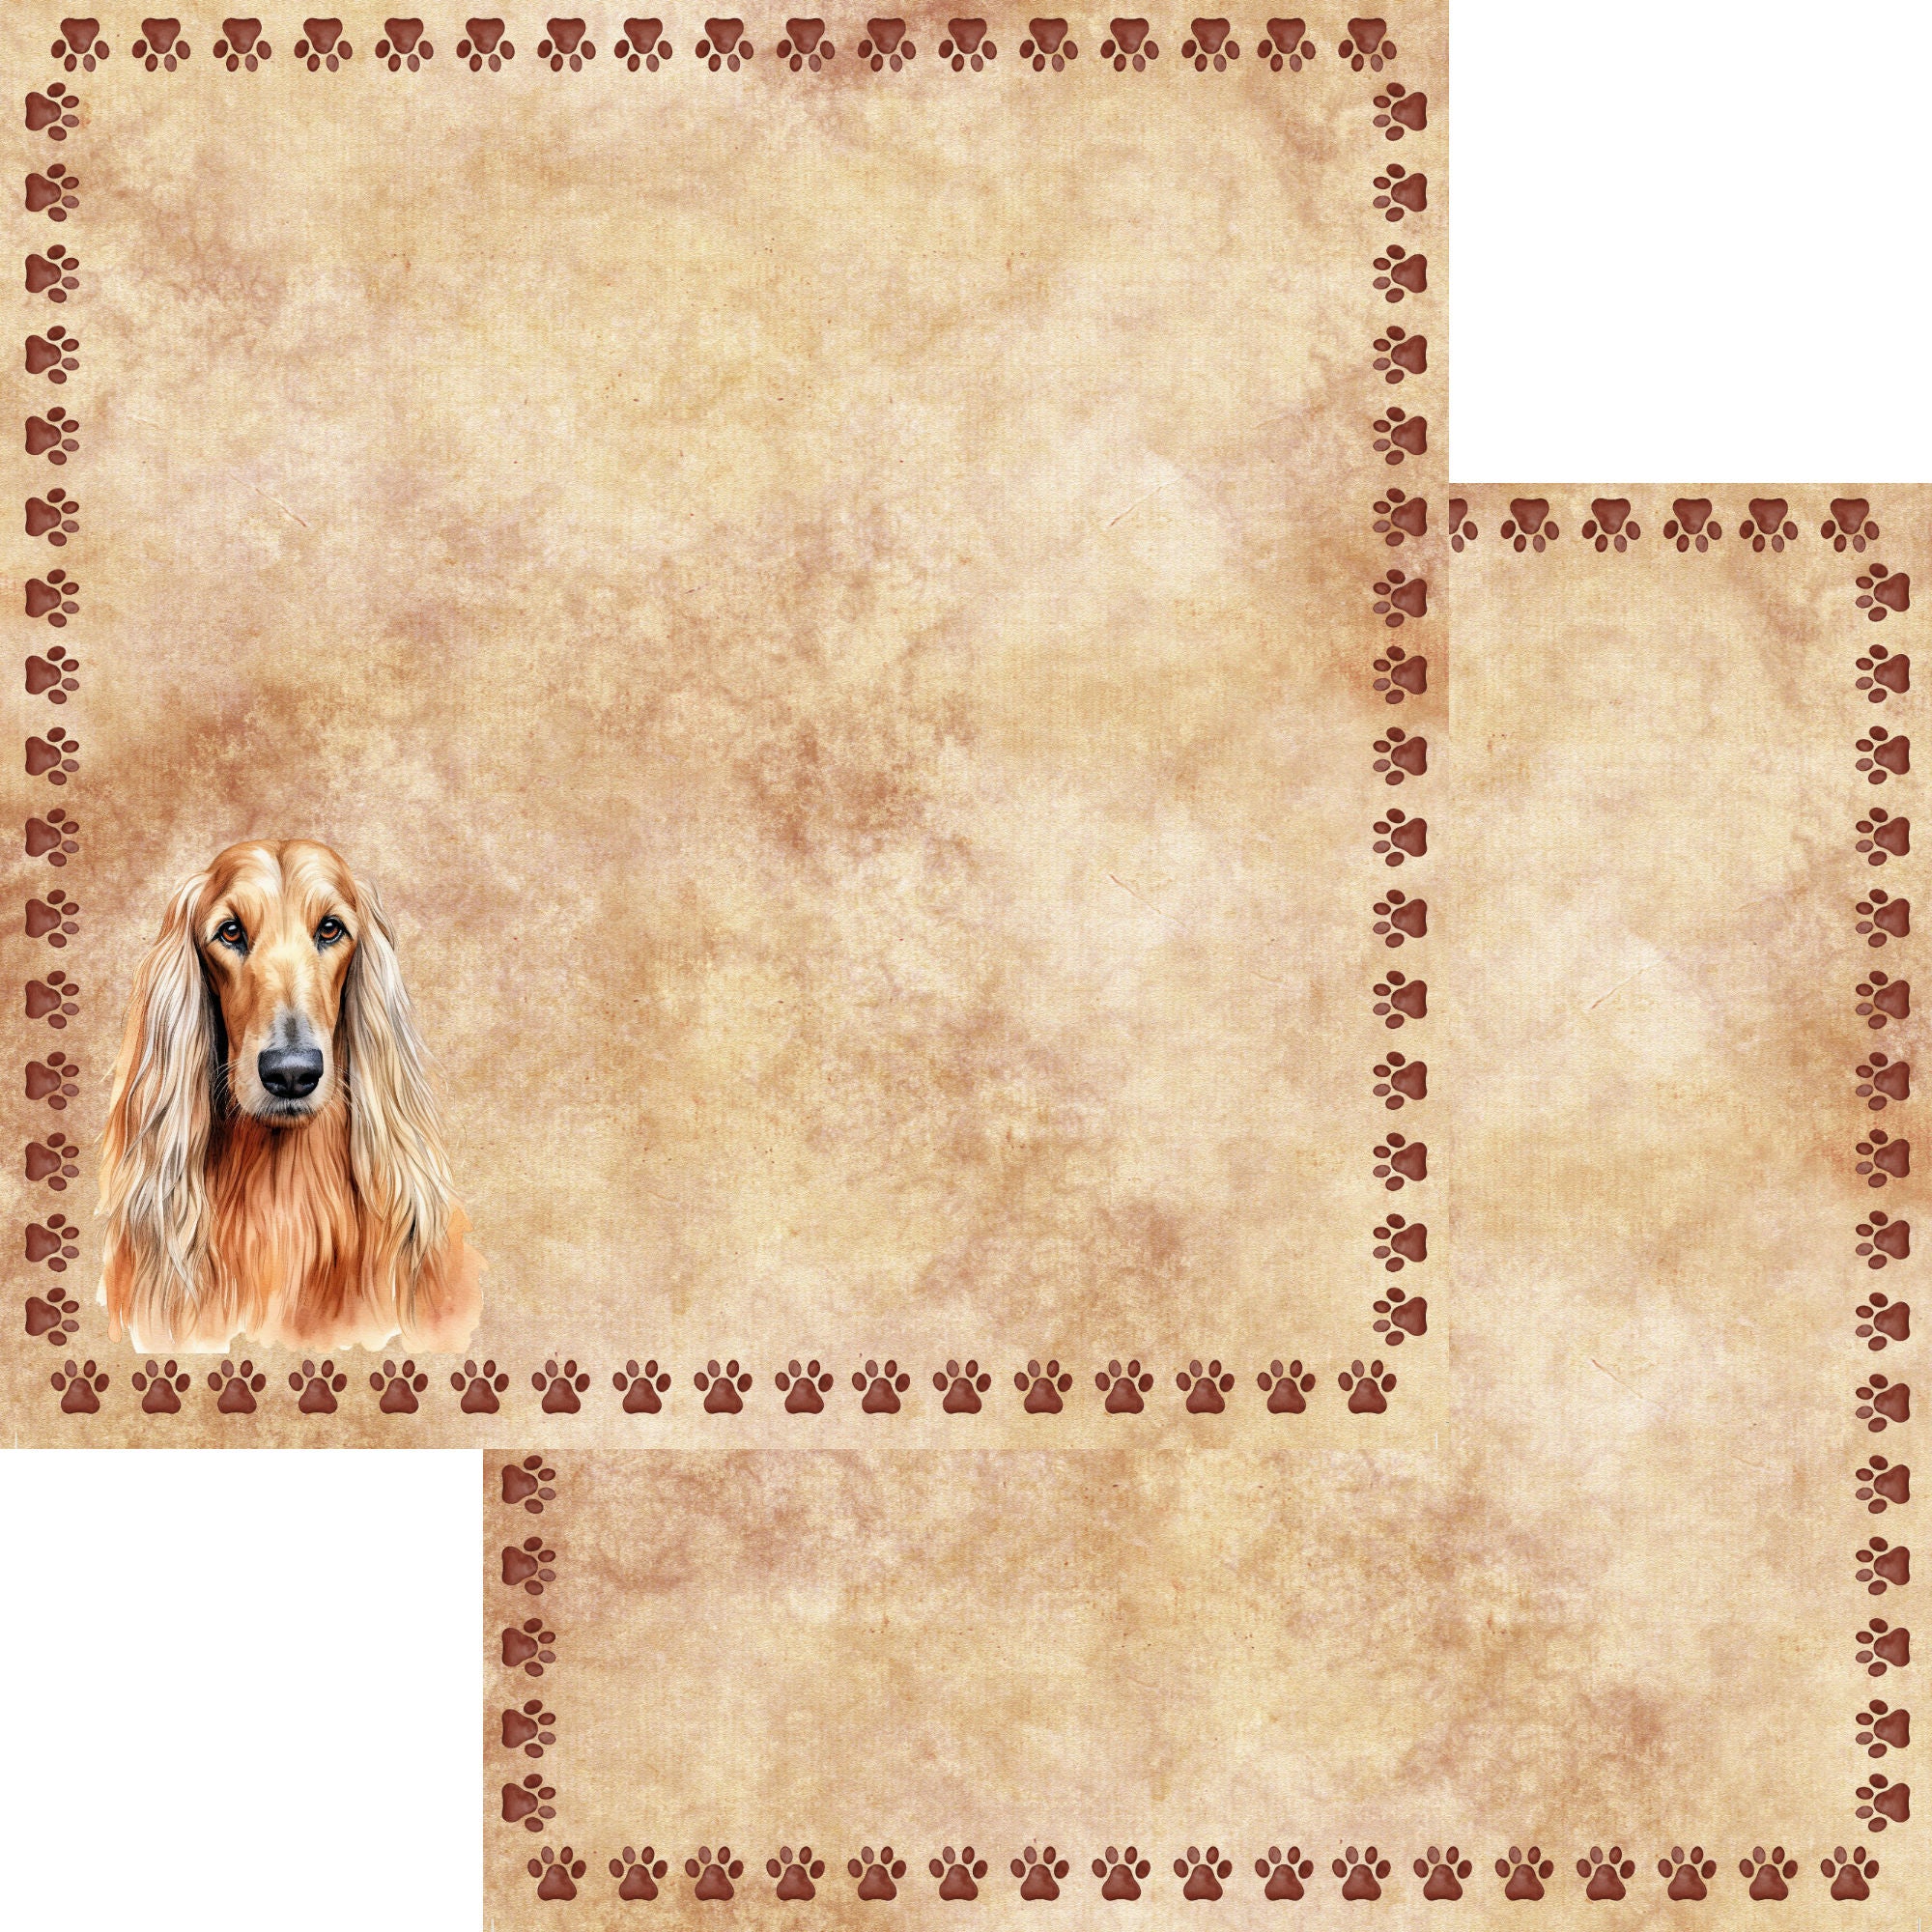 Dog Breeds Collection Afghan Hound 12 x 12 Double-Sided Scrapbook Paper by SSC Designs